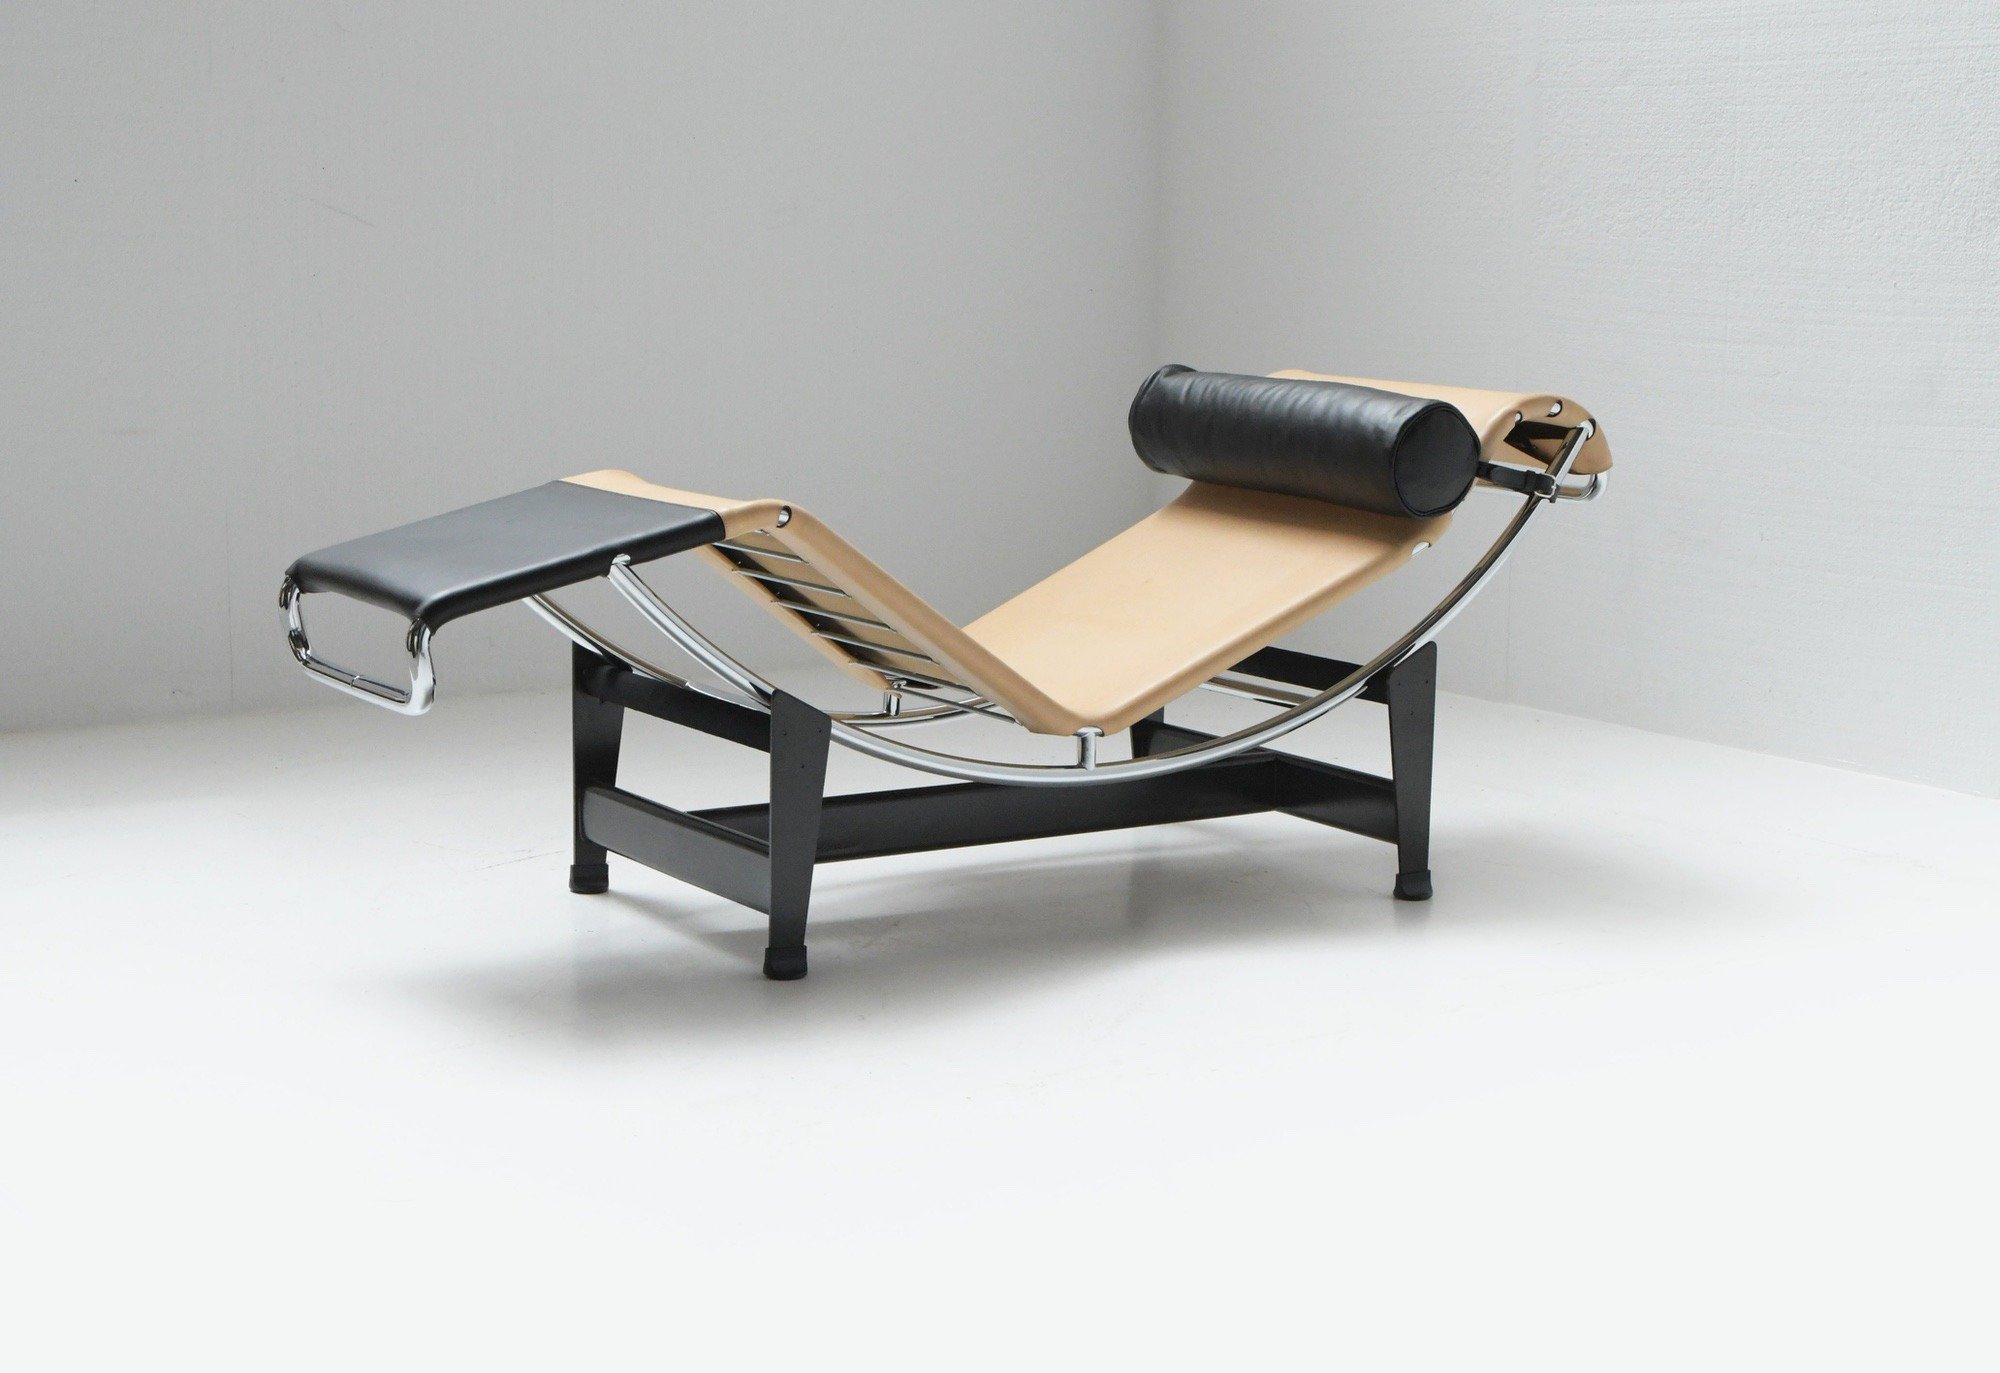 Charlotte Perriand, Le Corbusier, Pierre Jeanneret - Cassina, Louis vuitton  - Chaise lounge (1) - LC4 prototype in Italy